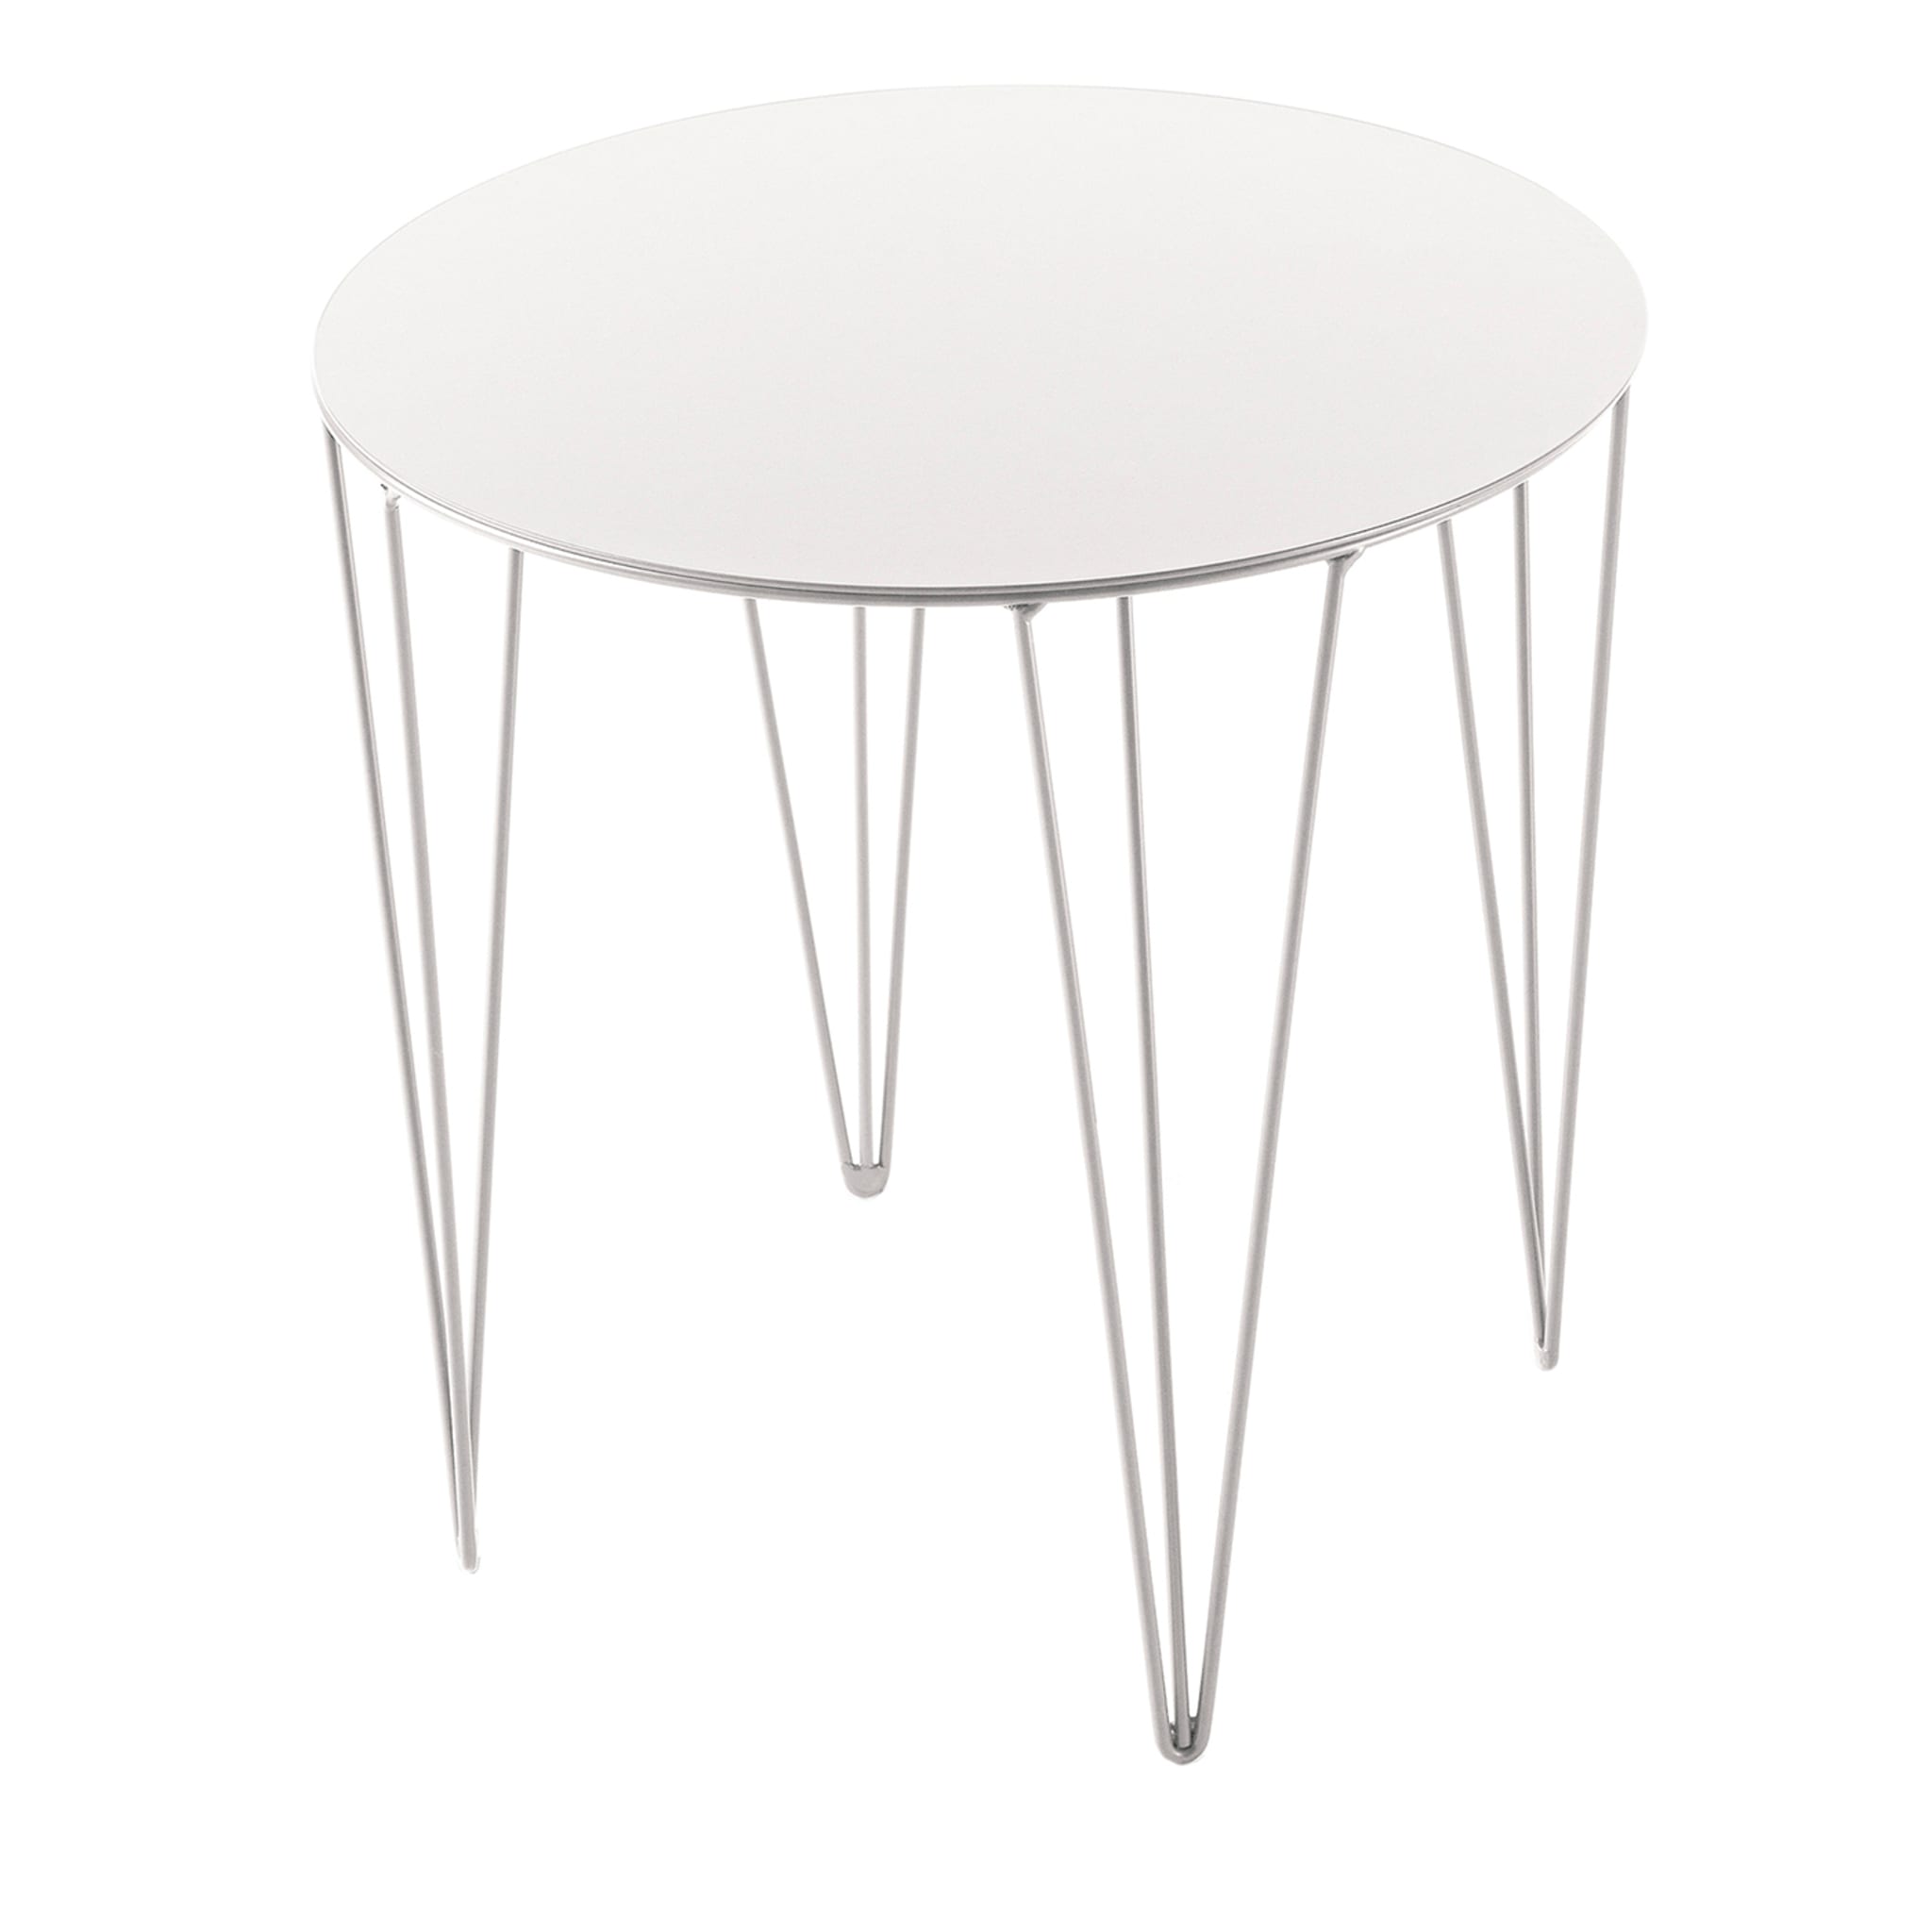 Chele White Round Coffee Table #2 - Main view